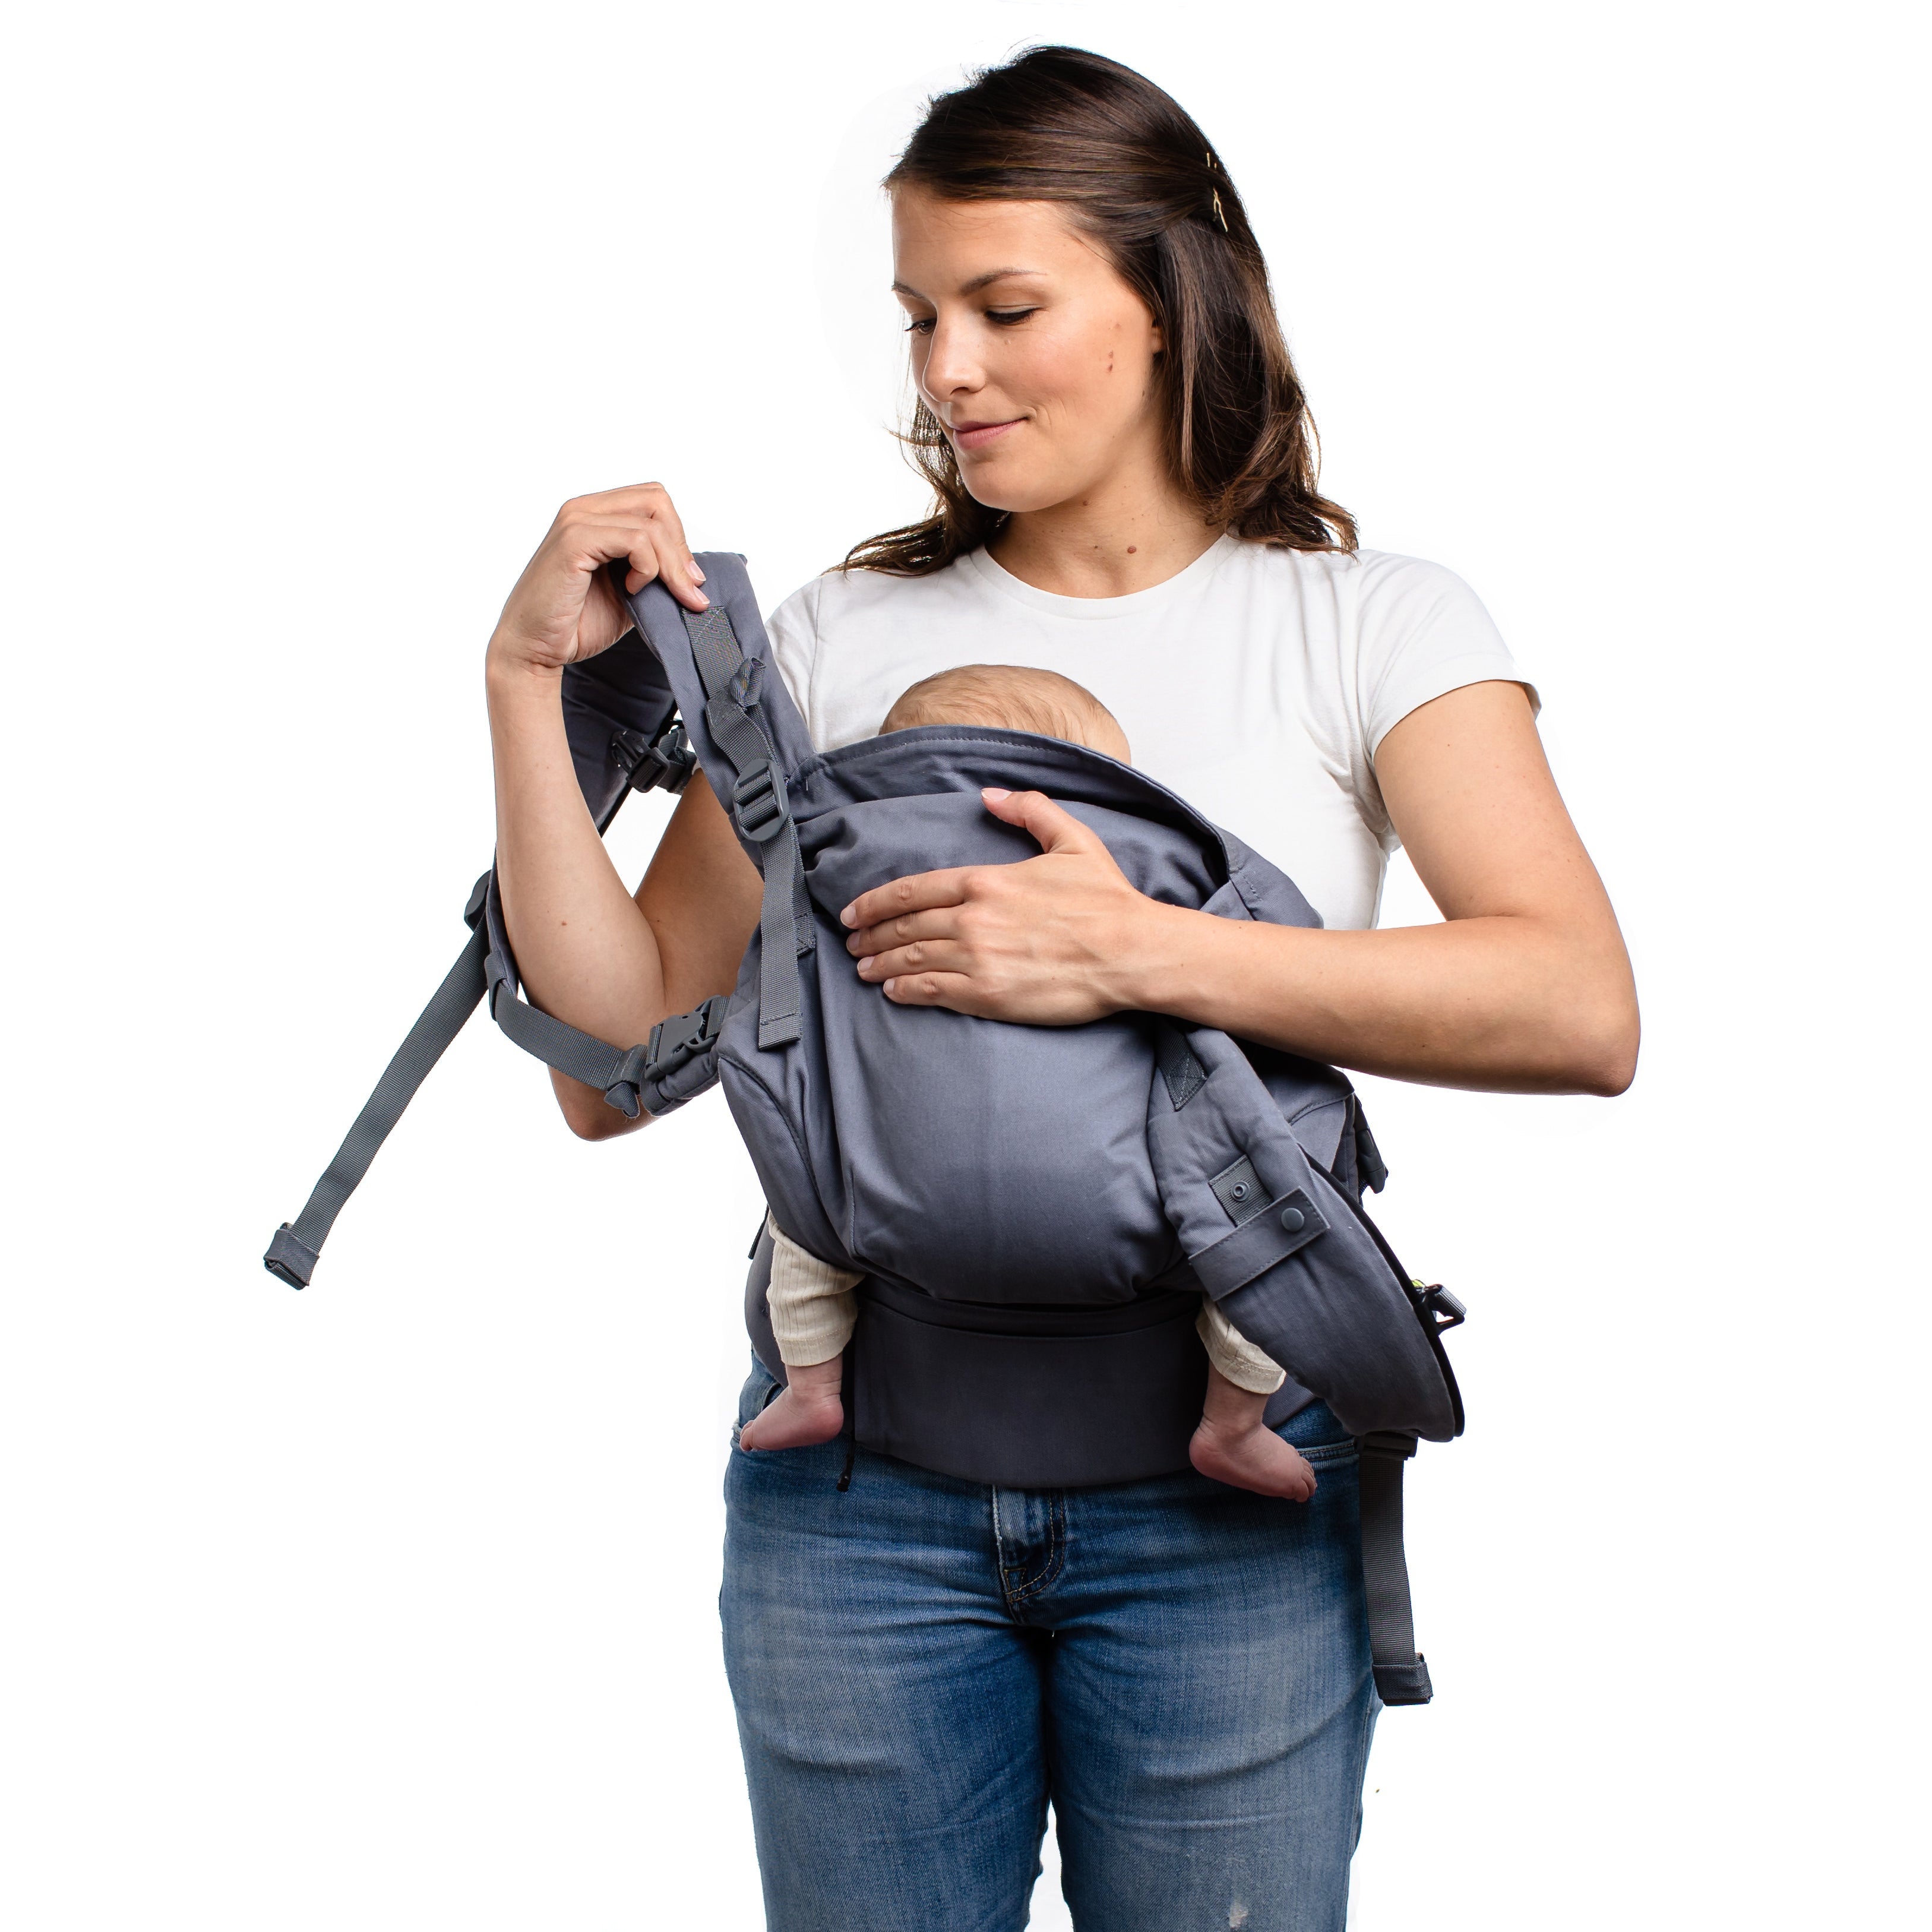 Confident young mom putting her baby in a front carry position in the gray boba x baby carrier.